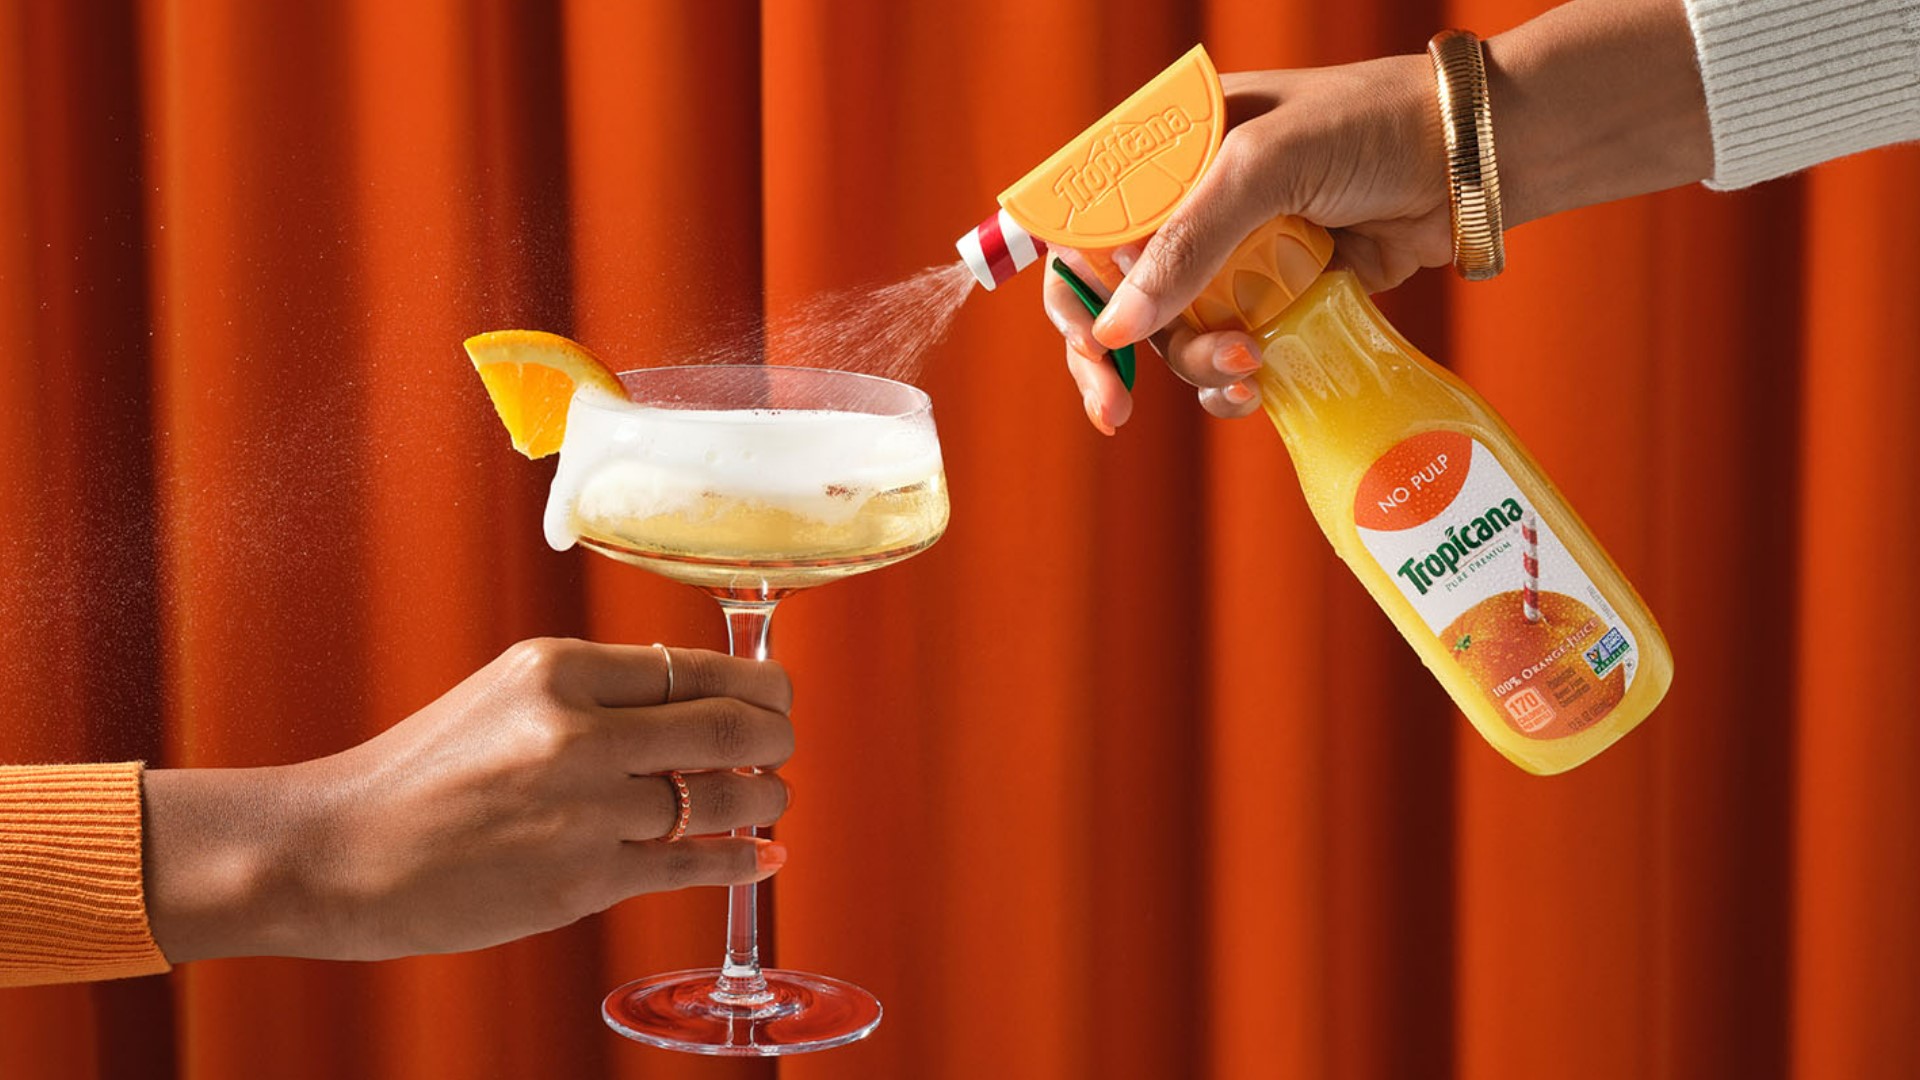 The "perfect mimosa" has been a trending joke on TikTok with users showing how they prepare their perfect mimosa without using too much orange juice.